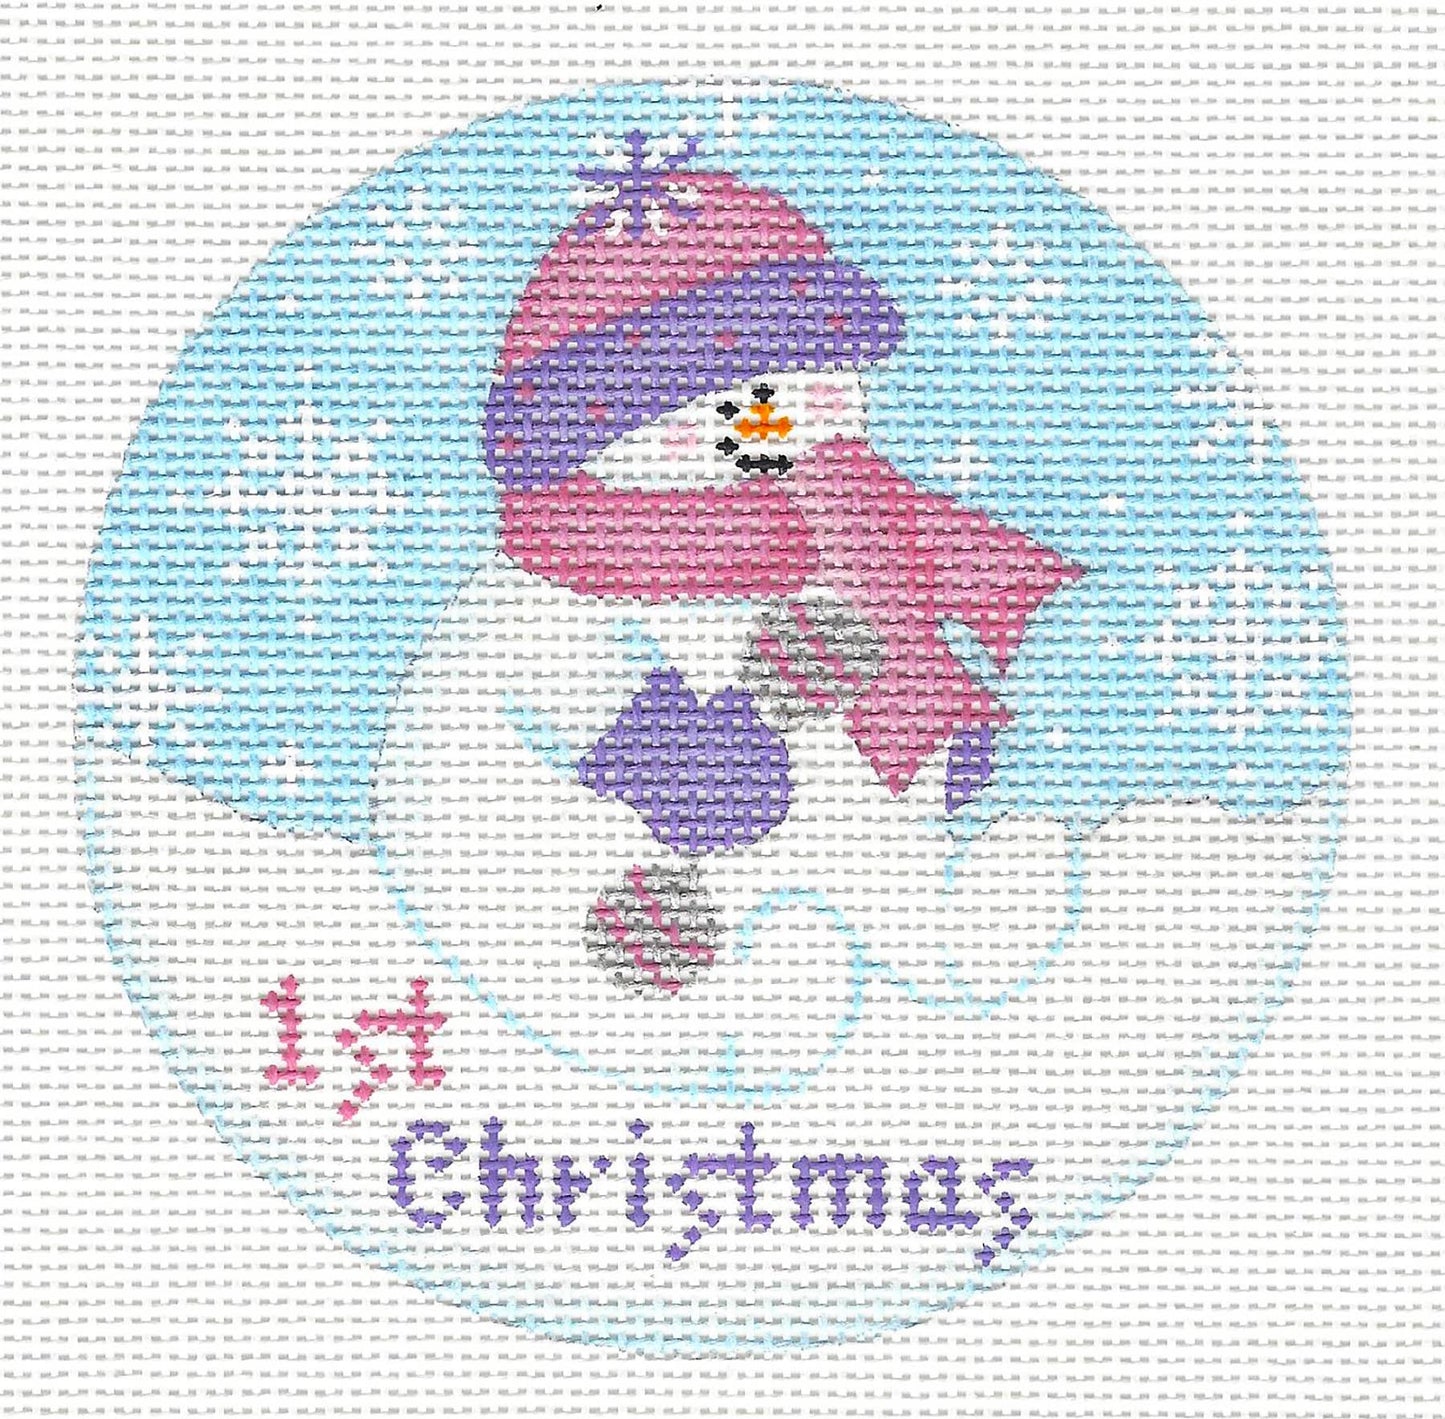 Baby Round ~ Baby Snowgirl's 1st Christmas 18 Mesh handpainted Needlepoint Canvas by Pepperberry